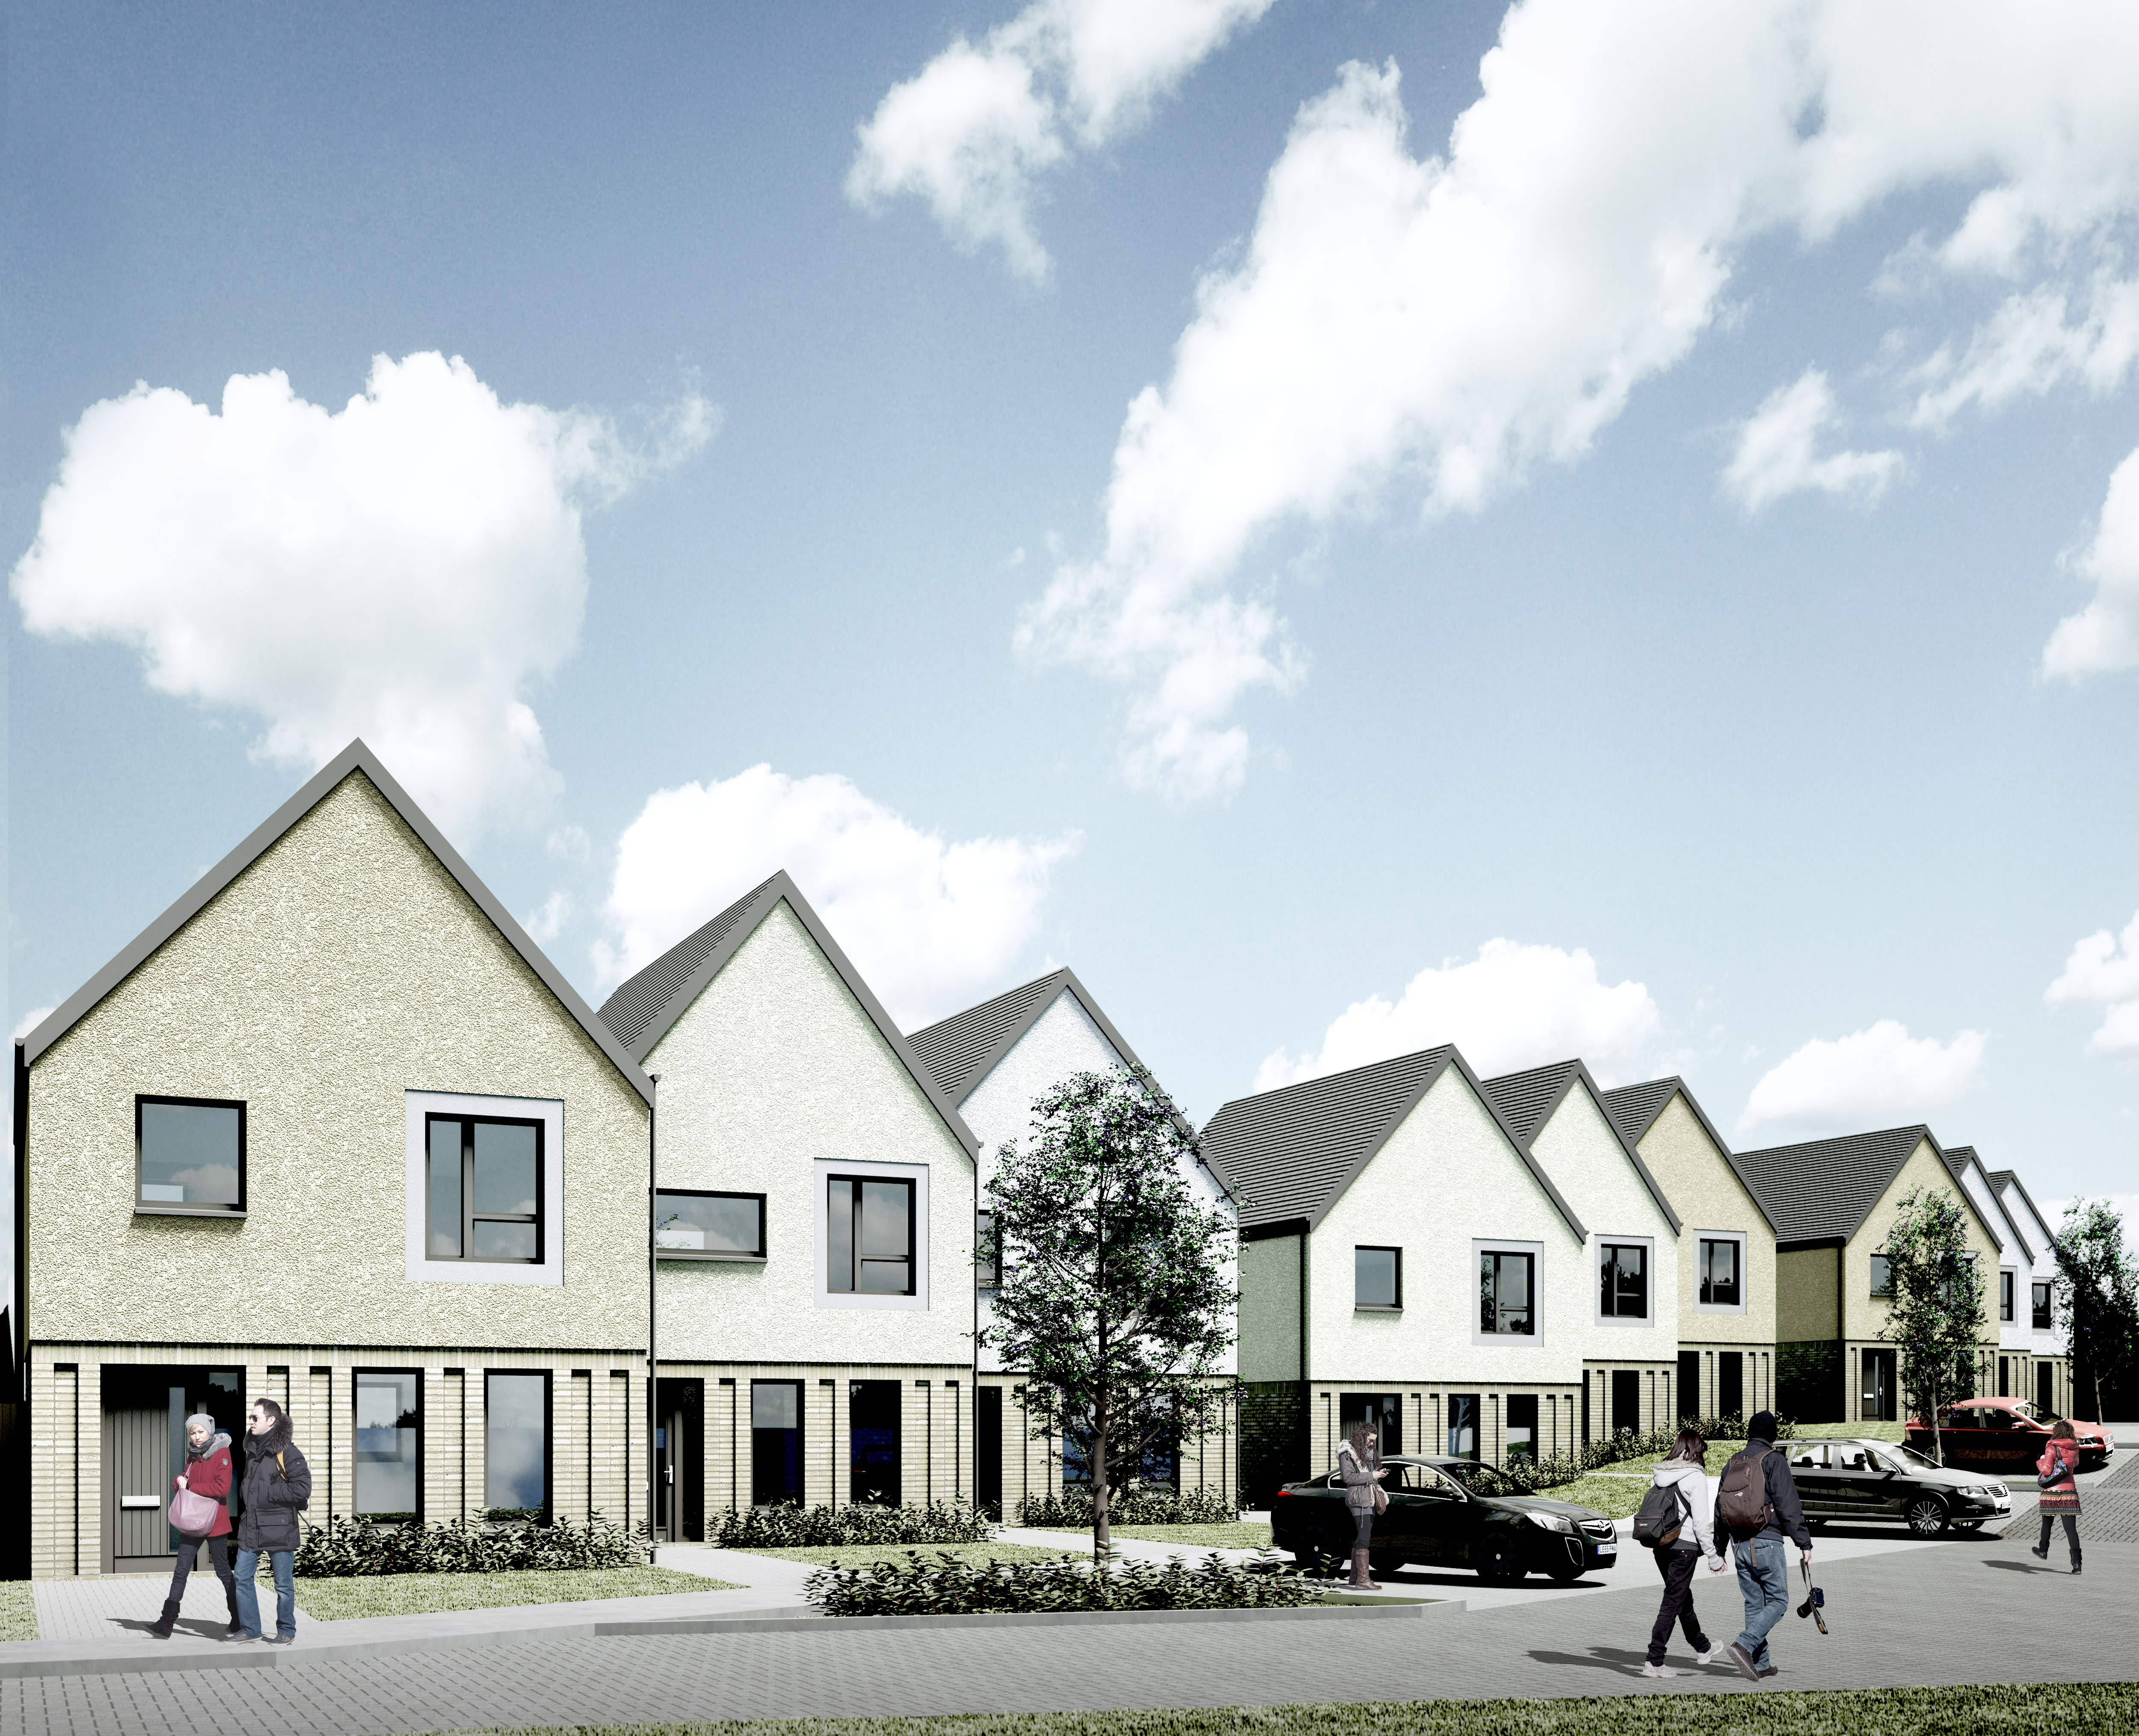 CCG to deliver 65 new affordable homes for Scone